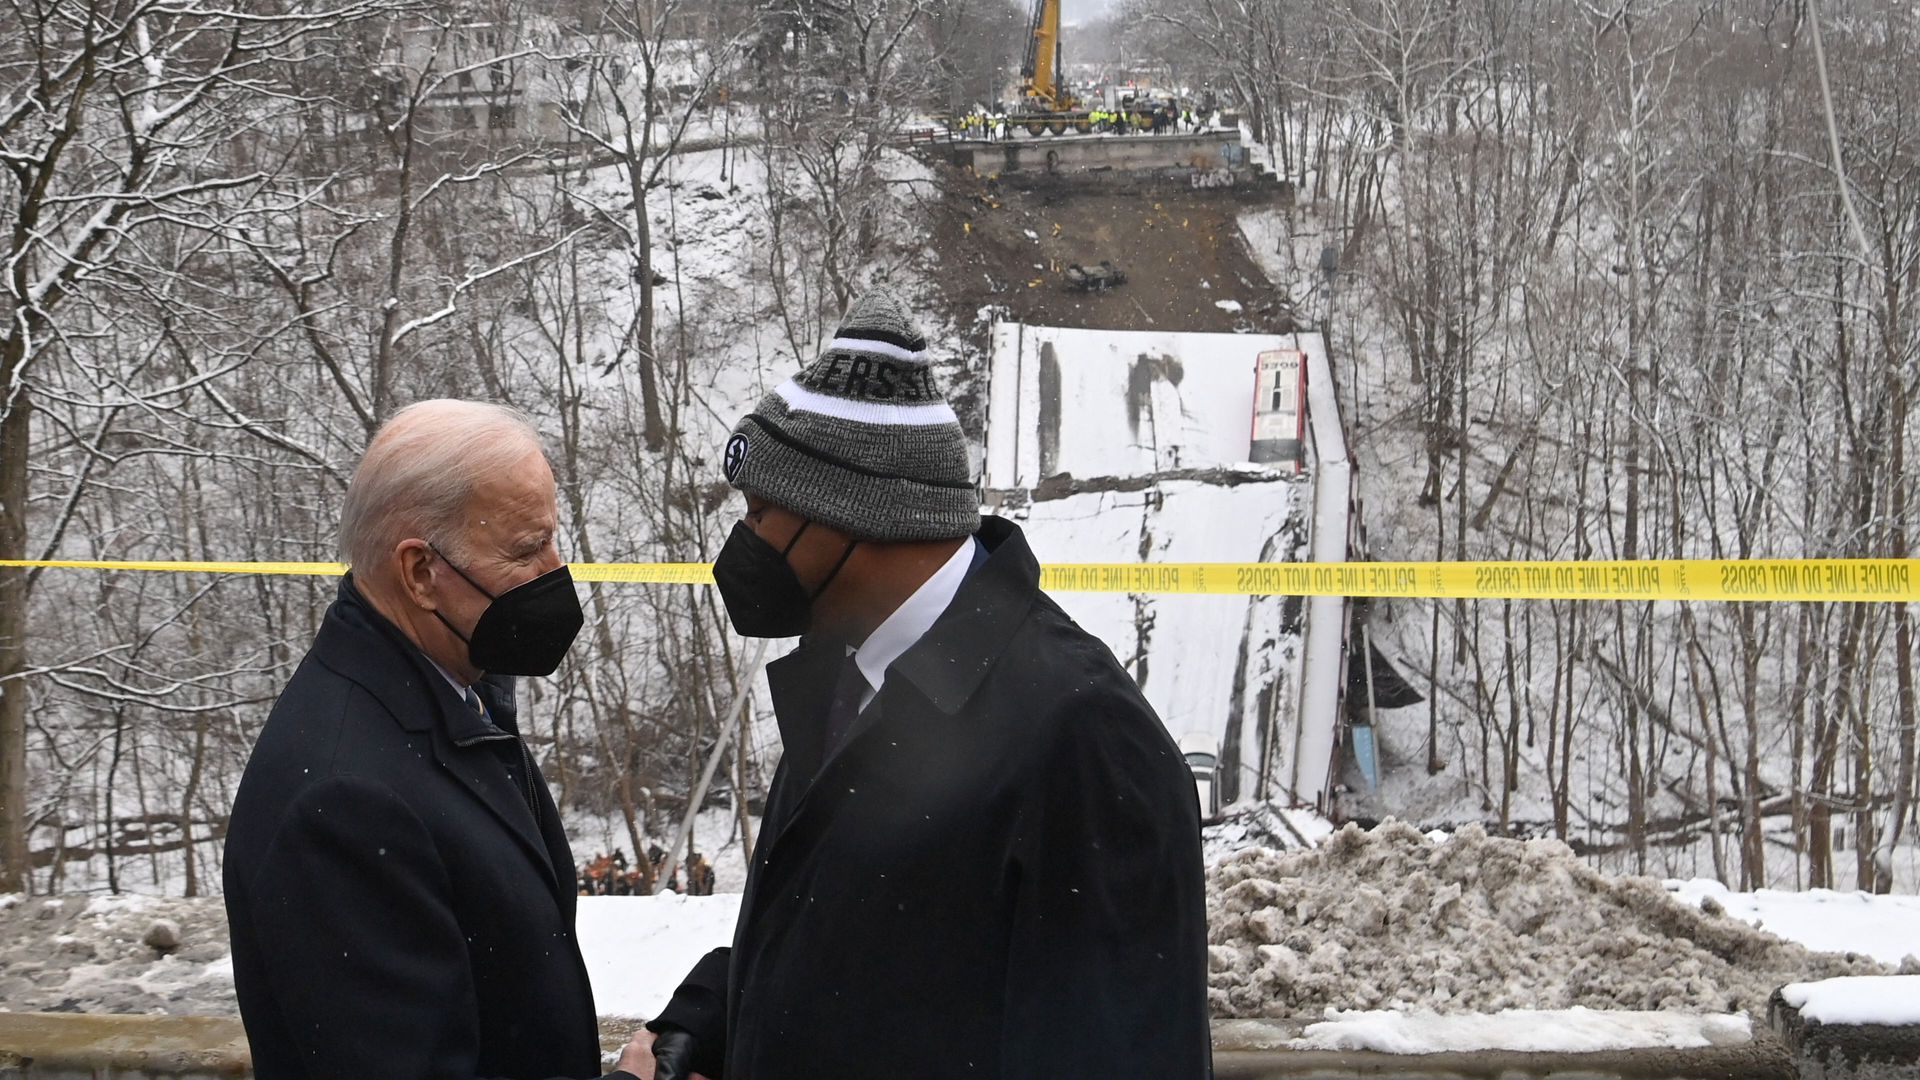 President Joe Biden and the Mayor of Pittsburgh Ed Gainey visit the scene of the Forbes Avenue Bridge collapse over Fern Hollow Creek in Frick Park in Pittsburgh, Pennsylvania, January 28, 2022